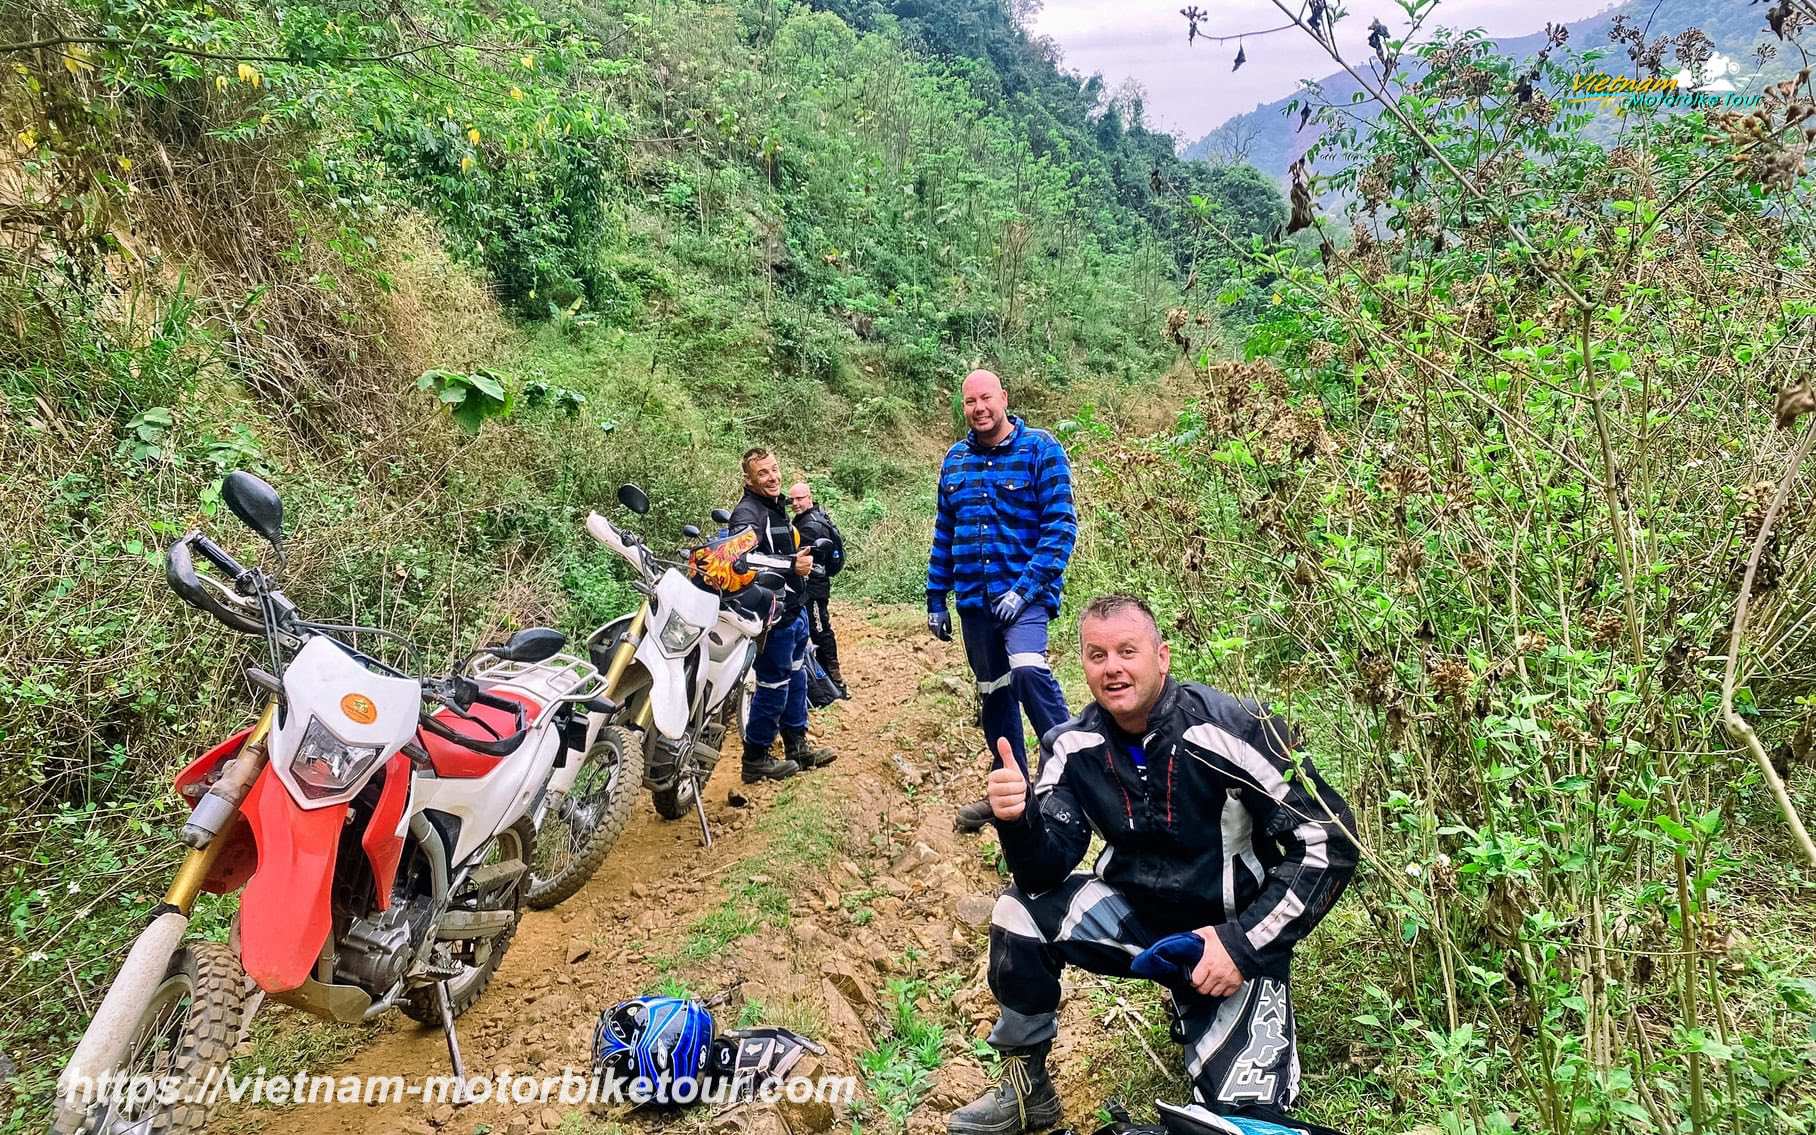 Tuan Giao Motorcycle Tours to Muong Lay